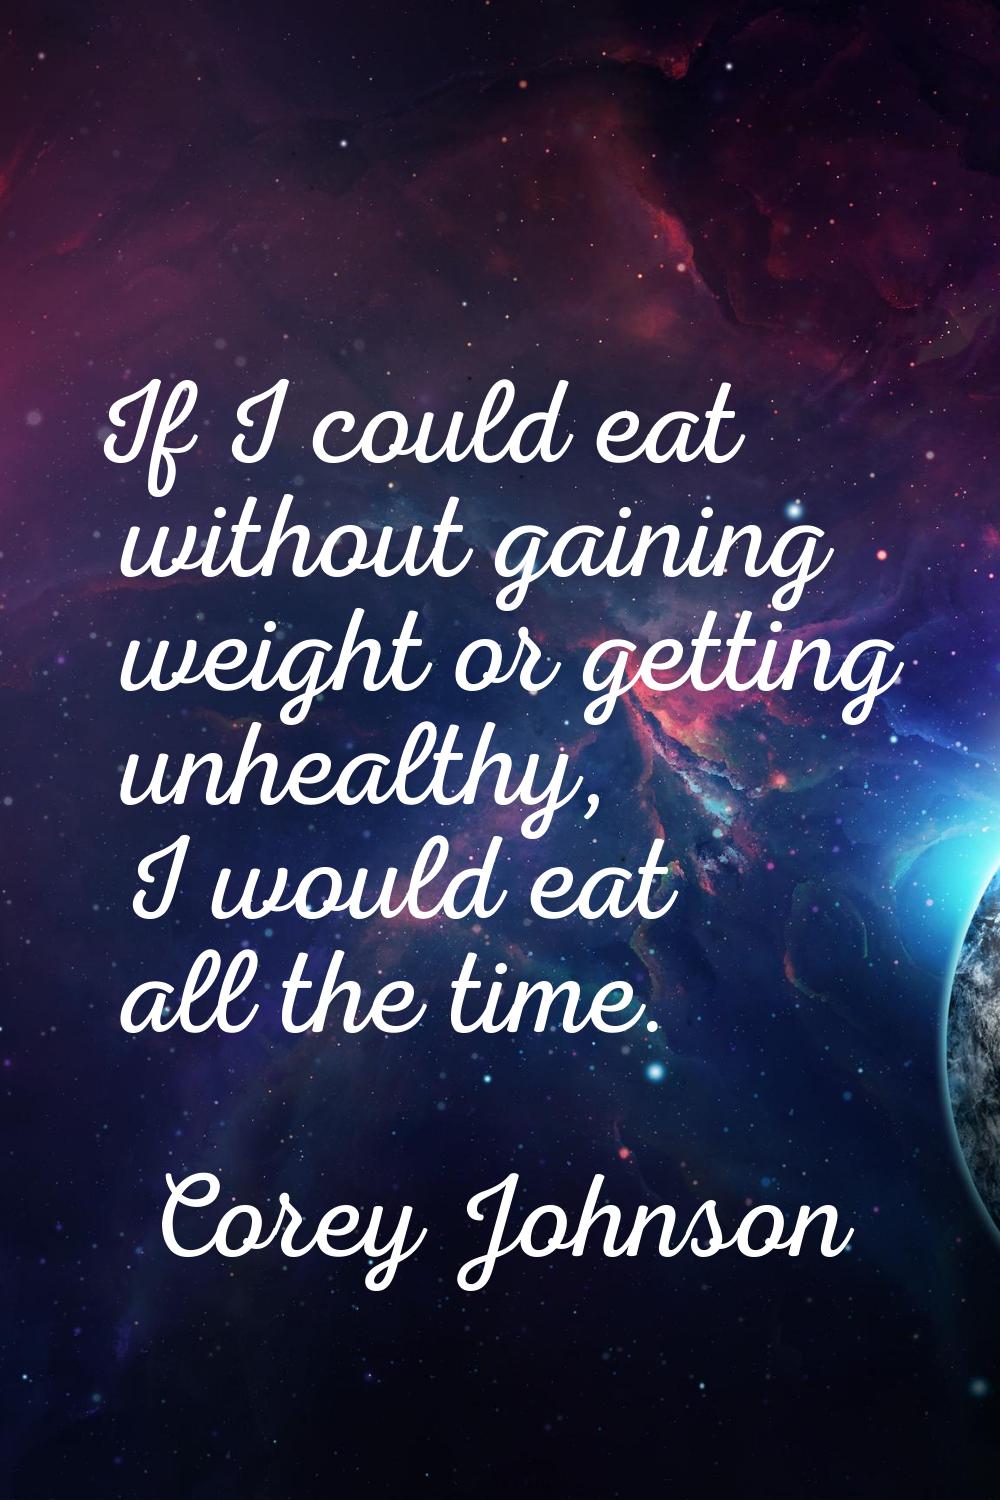 If I could eat without gaining weight or getting unhealthy, I would eat all the time.